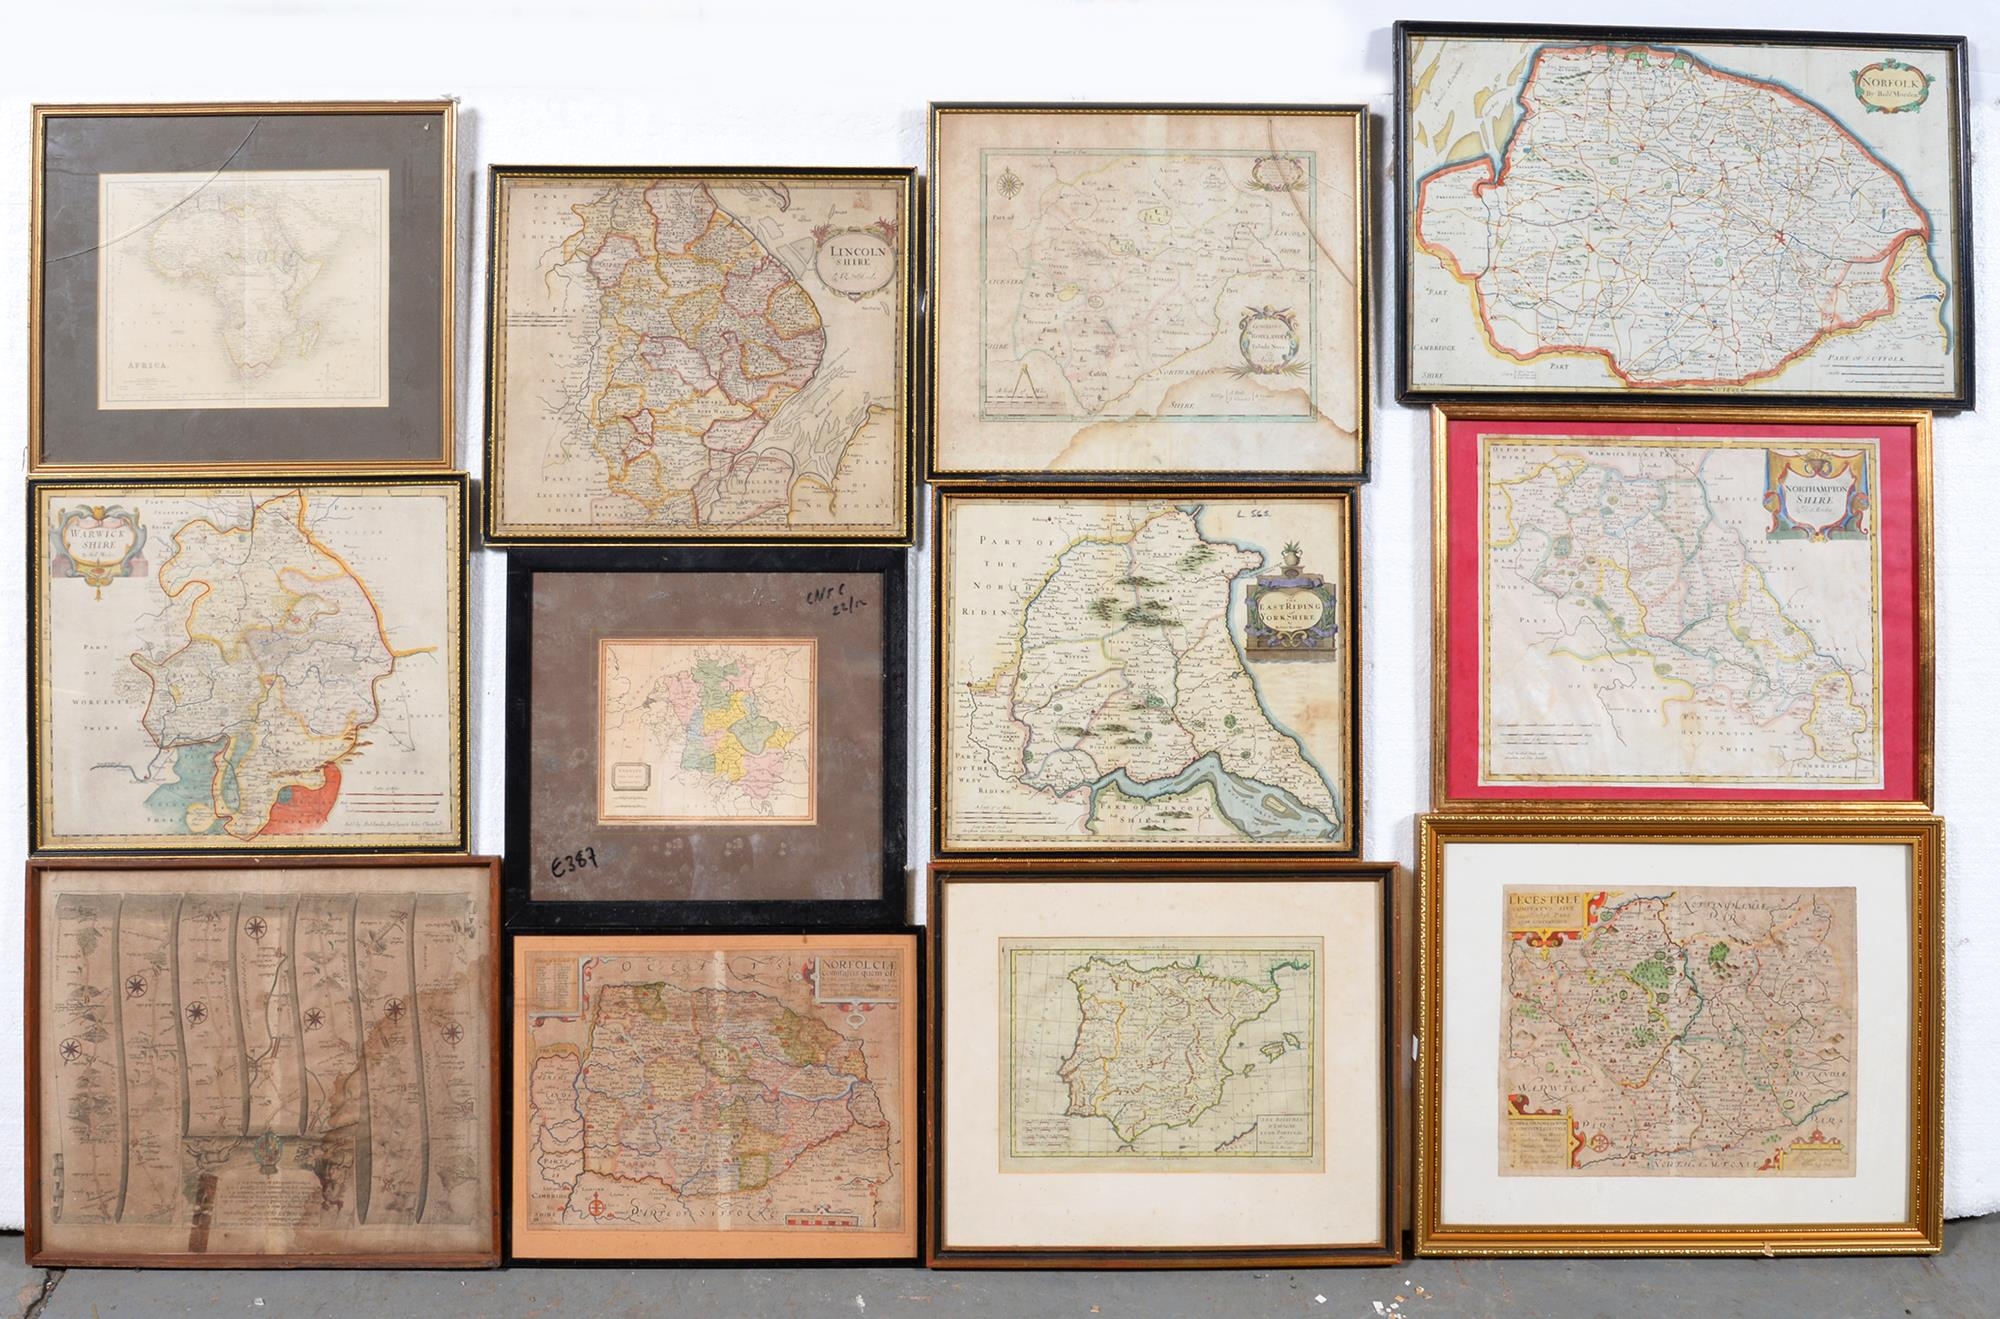 Maps, 18th and 19th c British county maps, mixed publishers and dates, mostly engravings and